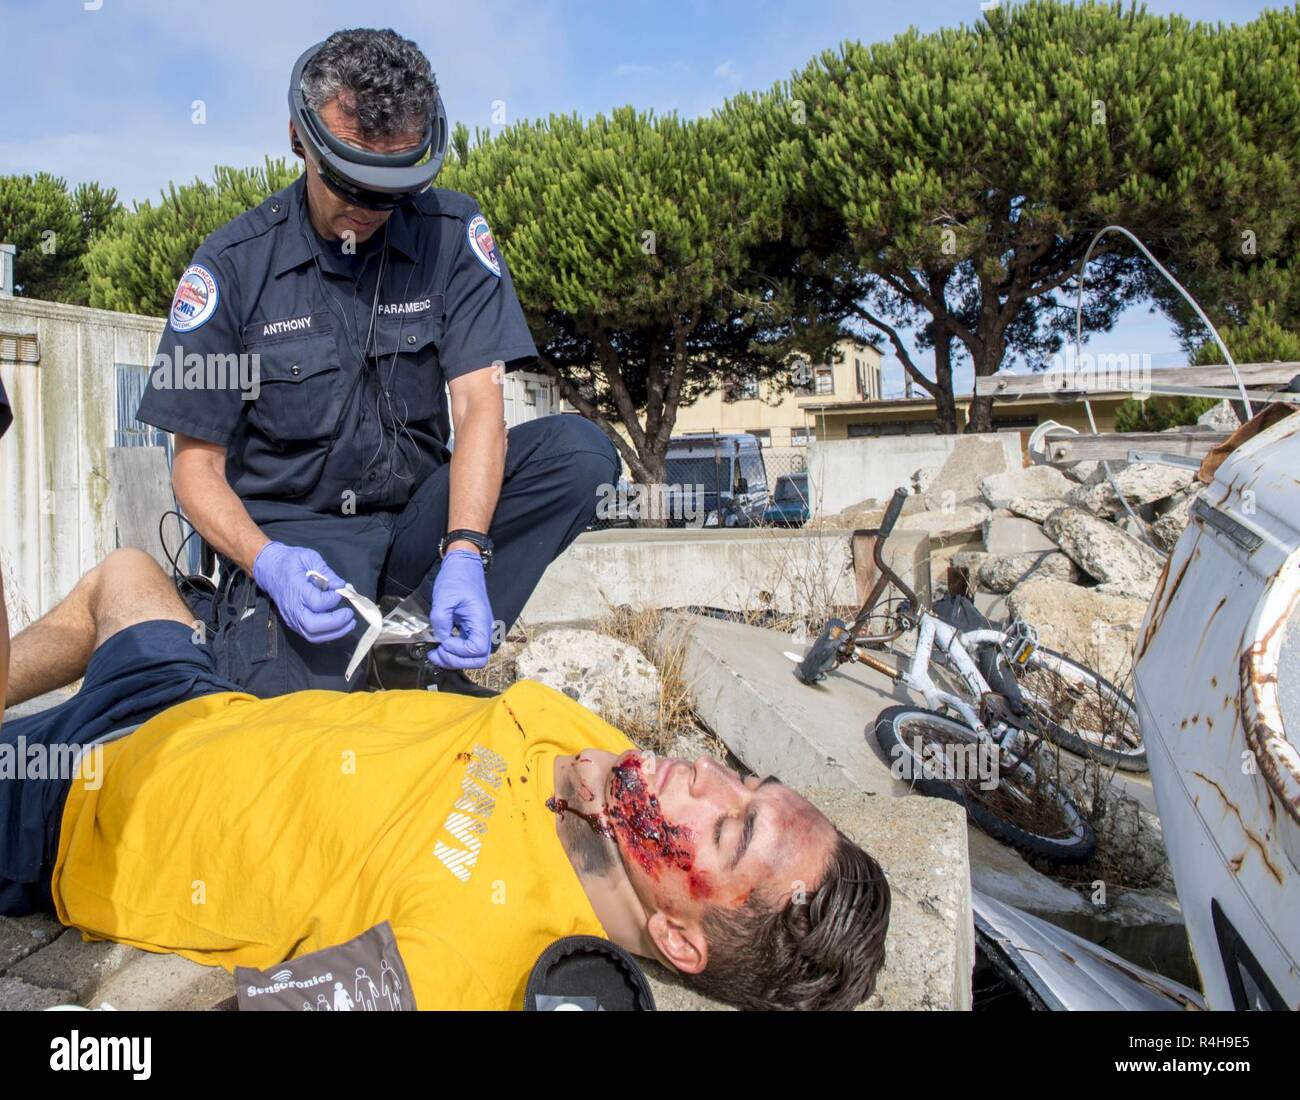 SAN FRANCISCO (Oct. 3, 2018) Anthony Roman (left), a paramedic assigned to San Francisco’s American Medical Response, prepares to insert an IV into the arm of a simulated patient using augmented reality glasses as part of a tele-medical training exercise during San Francisco Fleet Week (SFFW) 2018. SFFW is an opportunity for the American public to meet their Navy, Marine Corps and Coast Guard teams and experience America's sea services. During fleet week, service members participate in various community service events, showcase capabilities and equipment to the community, and enjoy the hospita Stock Photo